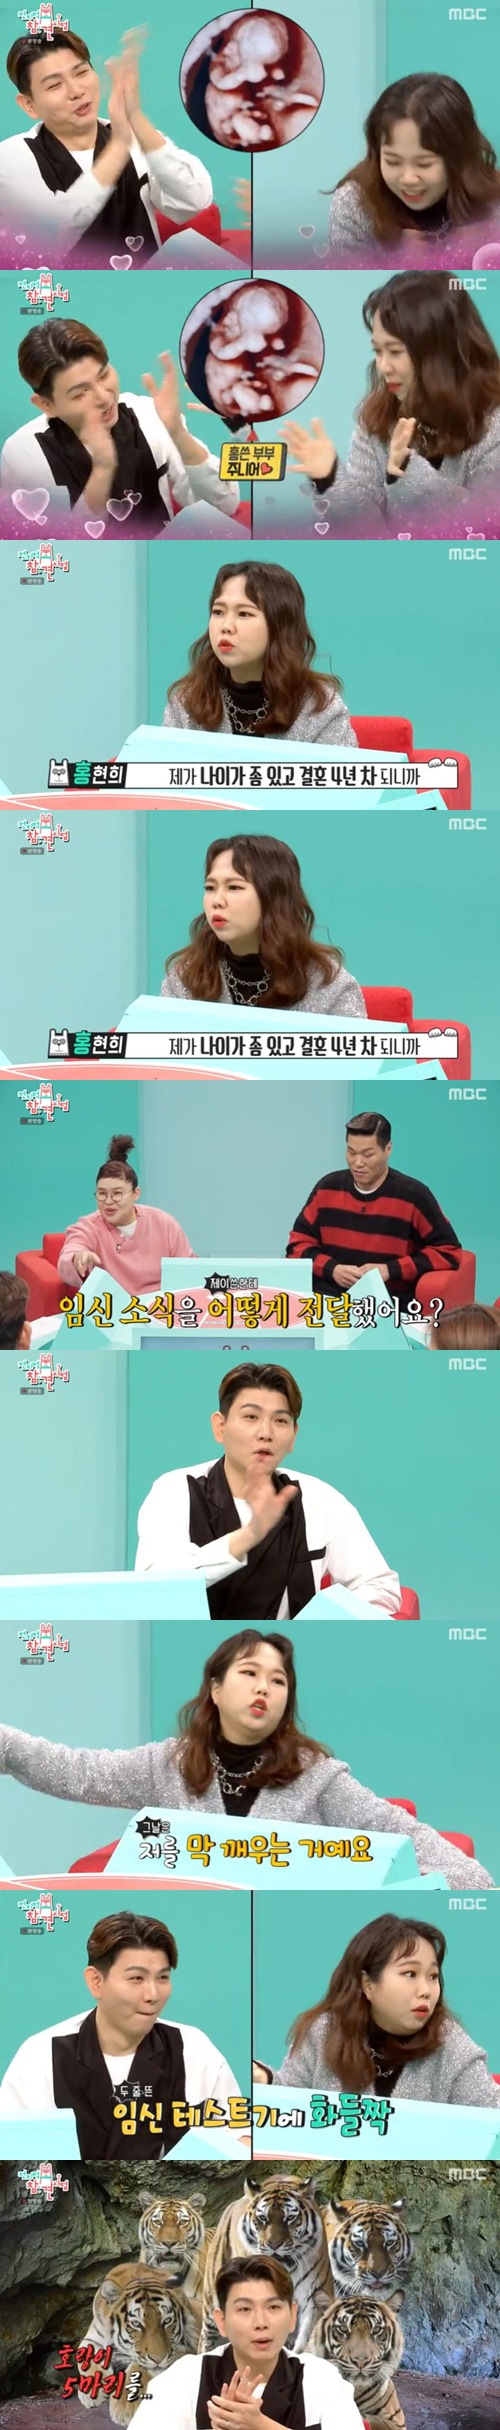 Point of Omniscient Interfere Hong Hyon-hee and Jason released their impressions and Taemong about the news of pregnancy.In the MBC entertainment program Point of Omniscient Interfere (hereinafter referred to as Point of Omniscient Interfere), which was broadcast on the afternoon of the 19th, Kwon Yul and Seohyun appeared.On this day, Jason and Hong Hyon-hee celebrated the song Congratulations on your pregnancy by the Point of Omniscient Interfere family members.Jason, who recalled his pregnancy confession, said, I originally woke me up at dawn when I did not wake up well. Hong Hyon-hee said, It was about 6:40 am.AhhhhhhhhhhhhhhhhhhhhhhhhhhhhhhhhhhhhhhhhhhhhhhhhhhhhhhhhhhhhhhhhJason said, Taemong was built by my mother-in-law. She said she brought five Tigers home.